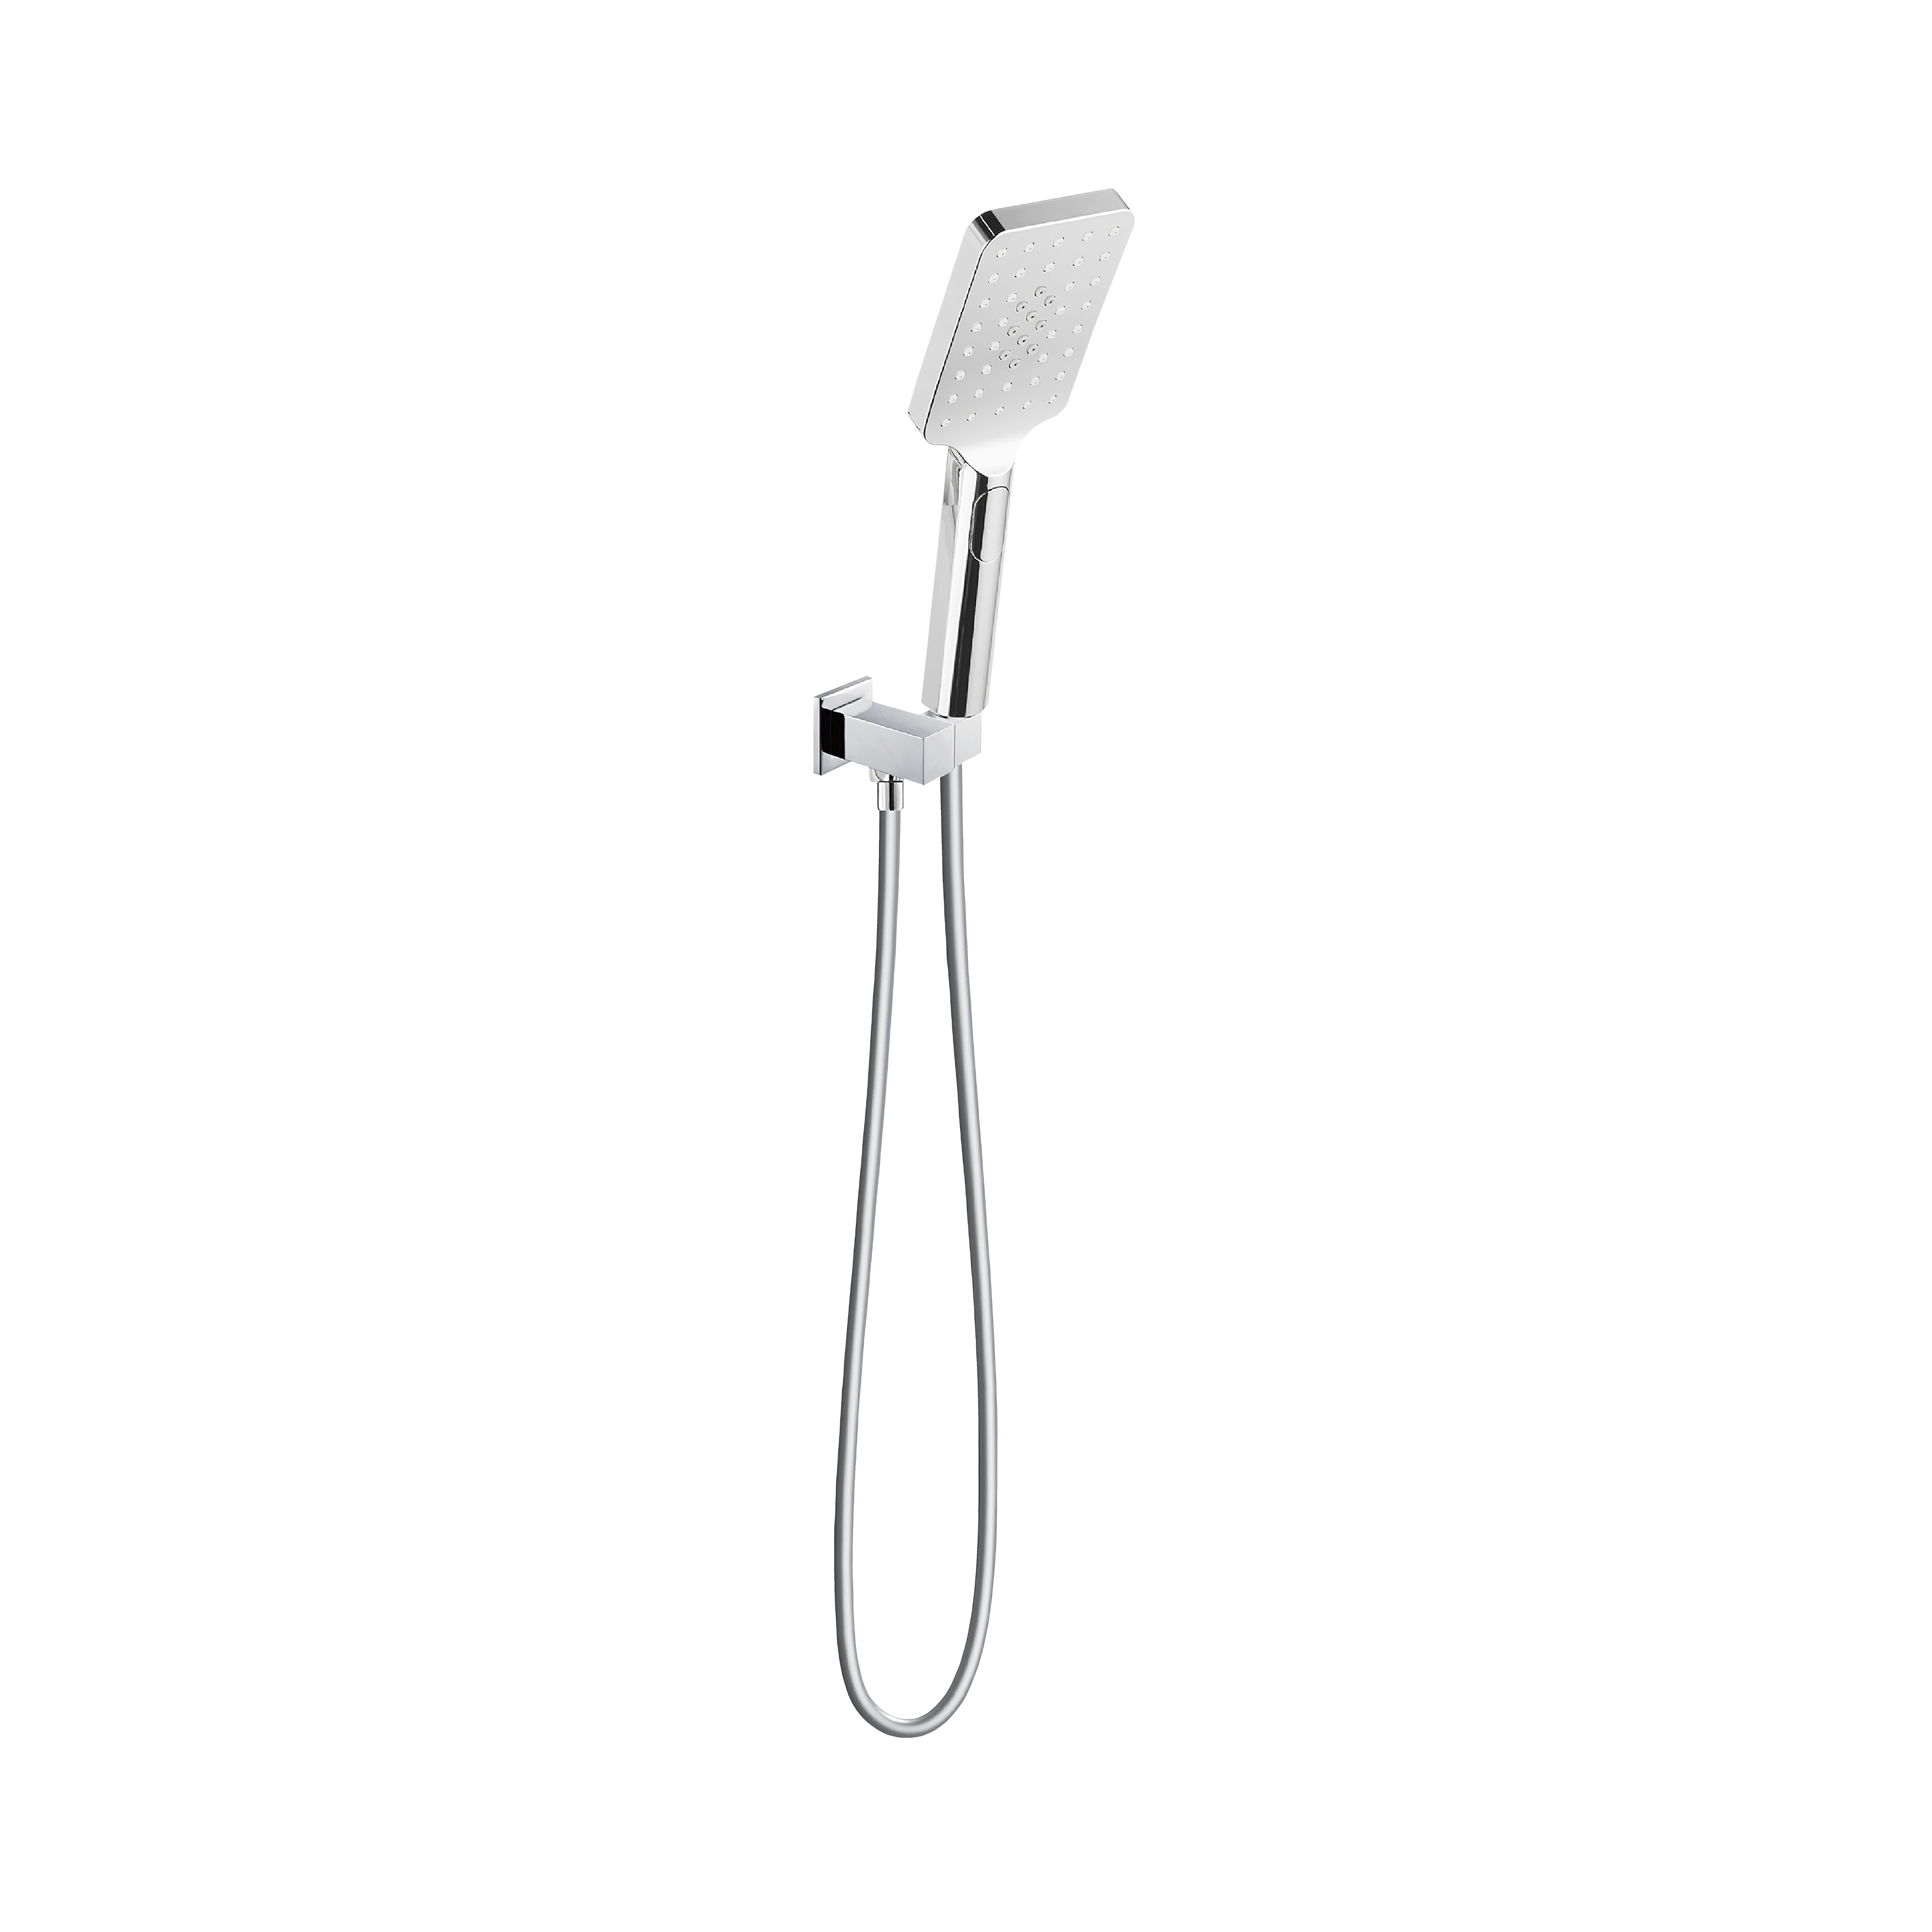 LINKWARE LIBERTY HAND SHOWER WITH WALL OUTLET CHROME